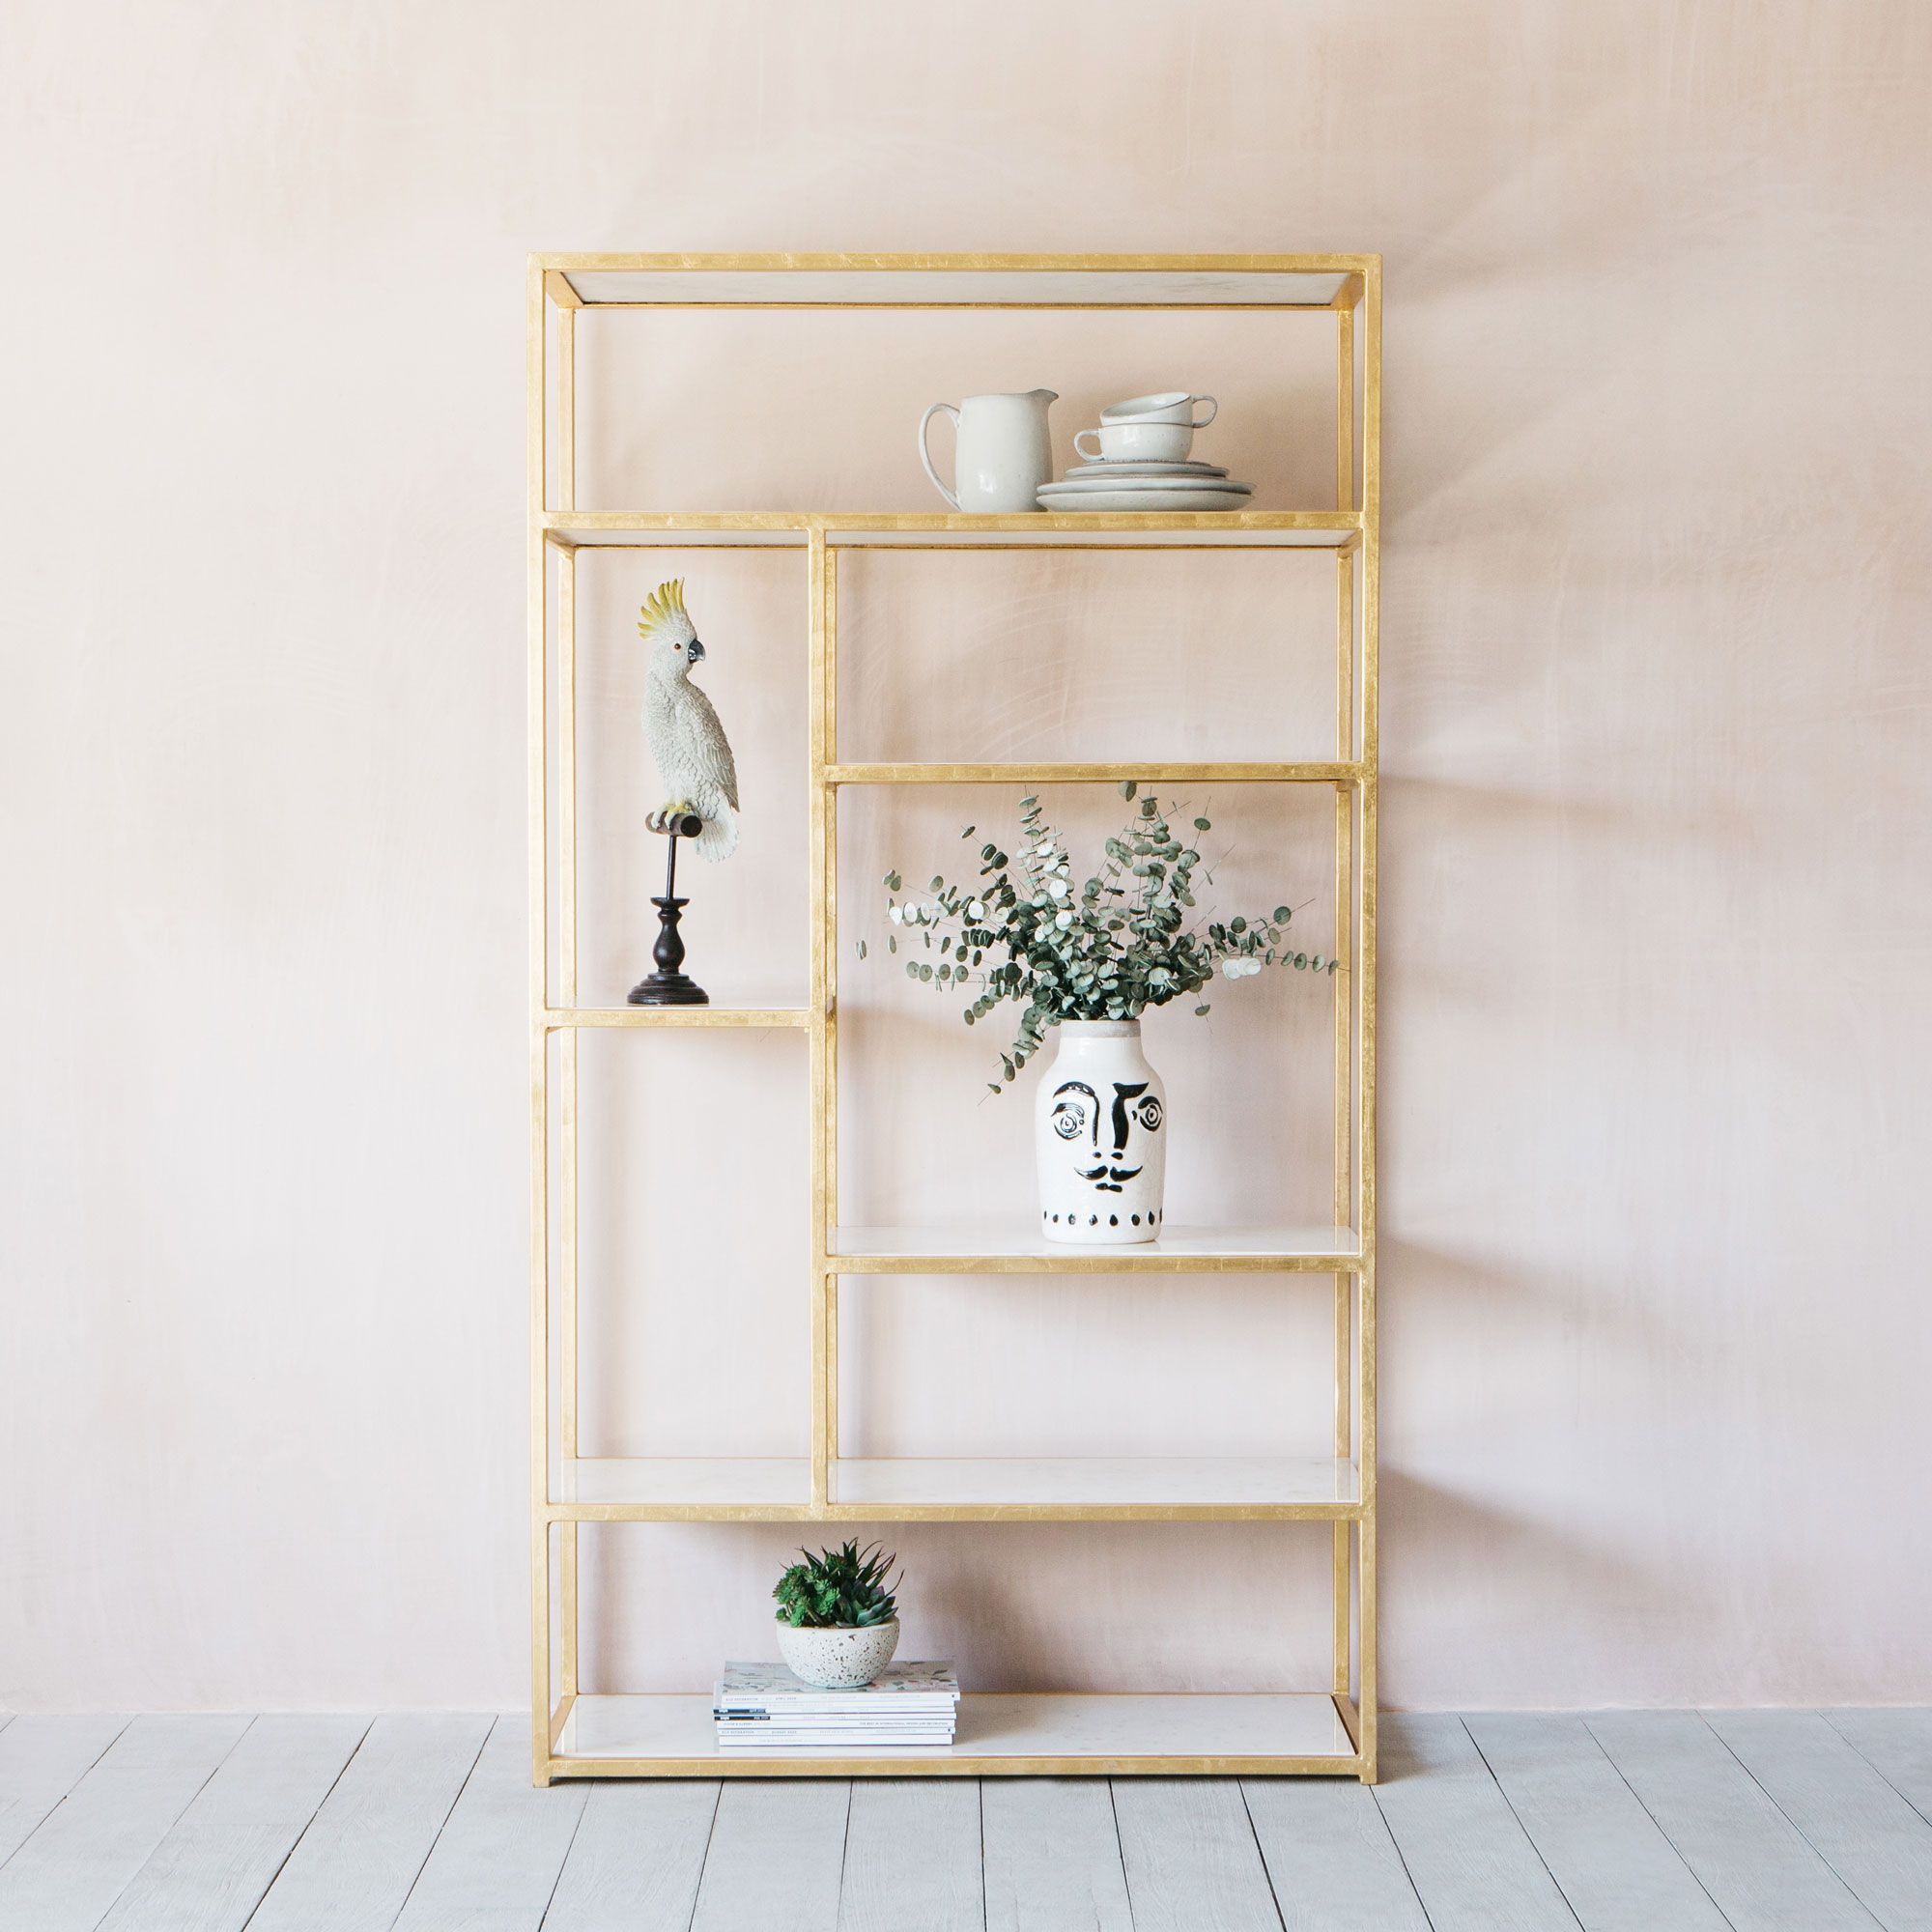 Diego Marble Shelving Unit